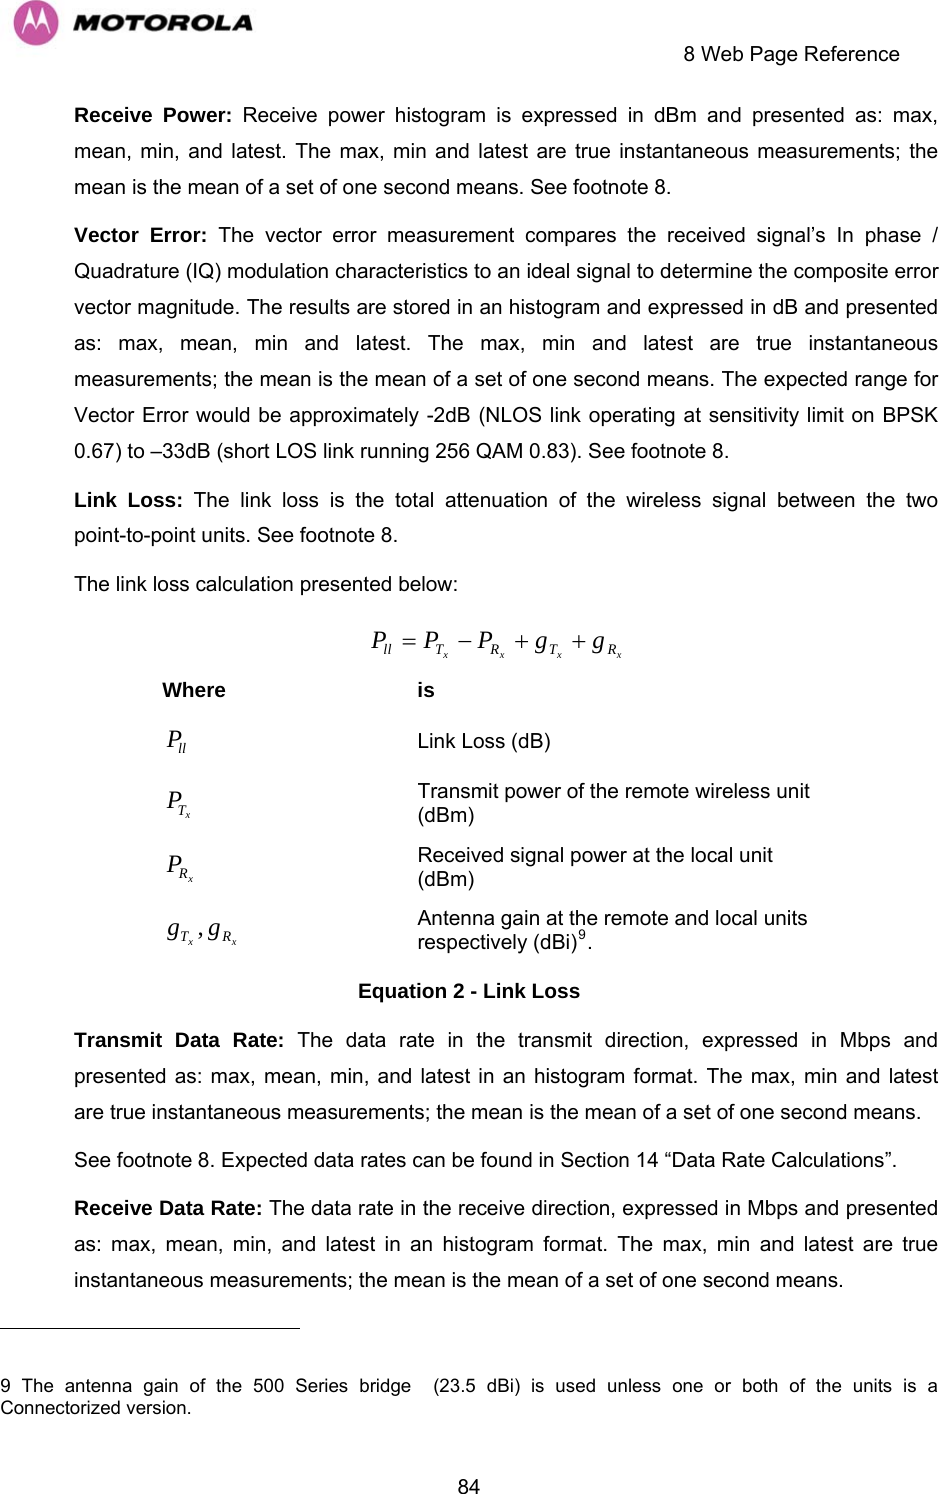     8 Web Page Reference  84xxxx RTRTll ggPPPReceive Power: Receive power histogram is expressed in dBm and presented as: max, mean, min, and latest. The max, min and latest are true instantaneous measurements; the mean is the mean of a set of one second means. See footnote 8.  Vector Error: The vector error measurement compares the received signal’s In phase / Quadrature (IQ) modulation characteristics to an ideal signal to determine the composite error vector magnitude. The results are stored in an histogram and expressed in dB and presented as: max, mean, min and latest. The max, min and latest are true instantaneous measurements; the mean is the mean of a set of one second means. The expected range for Vector Error would be approximately -2dB (NLOS link operating at sensitivity limit on BPSK 0.67) to –33dB (short LOS link running 256 QAM 0.83). See footnote 8. Link Loss: The link loss is the total attenuation of the wireless signal between the two point-to-point units. See footnote 8. The link loss calculation presented below: ++−= Where is llPxTPxRPxx RT gg ,                                                      Link Loss (dB)  Transmit power of the remote wireless unit (dBm)  Received signal power at the local unit (dBm)  Antenna gain at the remote and local units respectively (dBi)9.  Equation 2 - Link Loss Transmit Data Rate: The data rate in the transmit direction, expressed in Mbps and presented as: max, mean, min, and latest in an histogram format. The max, min and latest are true instantaneous measurements; the mean is the mean of a set of one second means. See footnote 8. Expected data rates can be found in Section 14 “Data Rate Calculations”.  Receive Data Rate: The data rate in the receive direction, expressed in Mbps and presented as: max, mean, min, and latest in an histogram format. The max, min and latest are true instantaneous measurements; the mean is the mean of a set of one second means.   9 The antenna gain of the 500 Series bridge  (23.5 dBi) is used unless one or both of the units is a Connectorized version.   